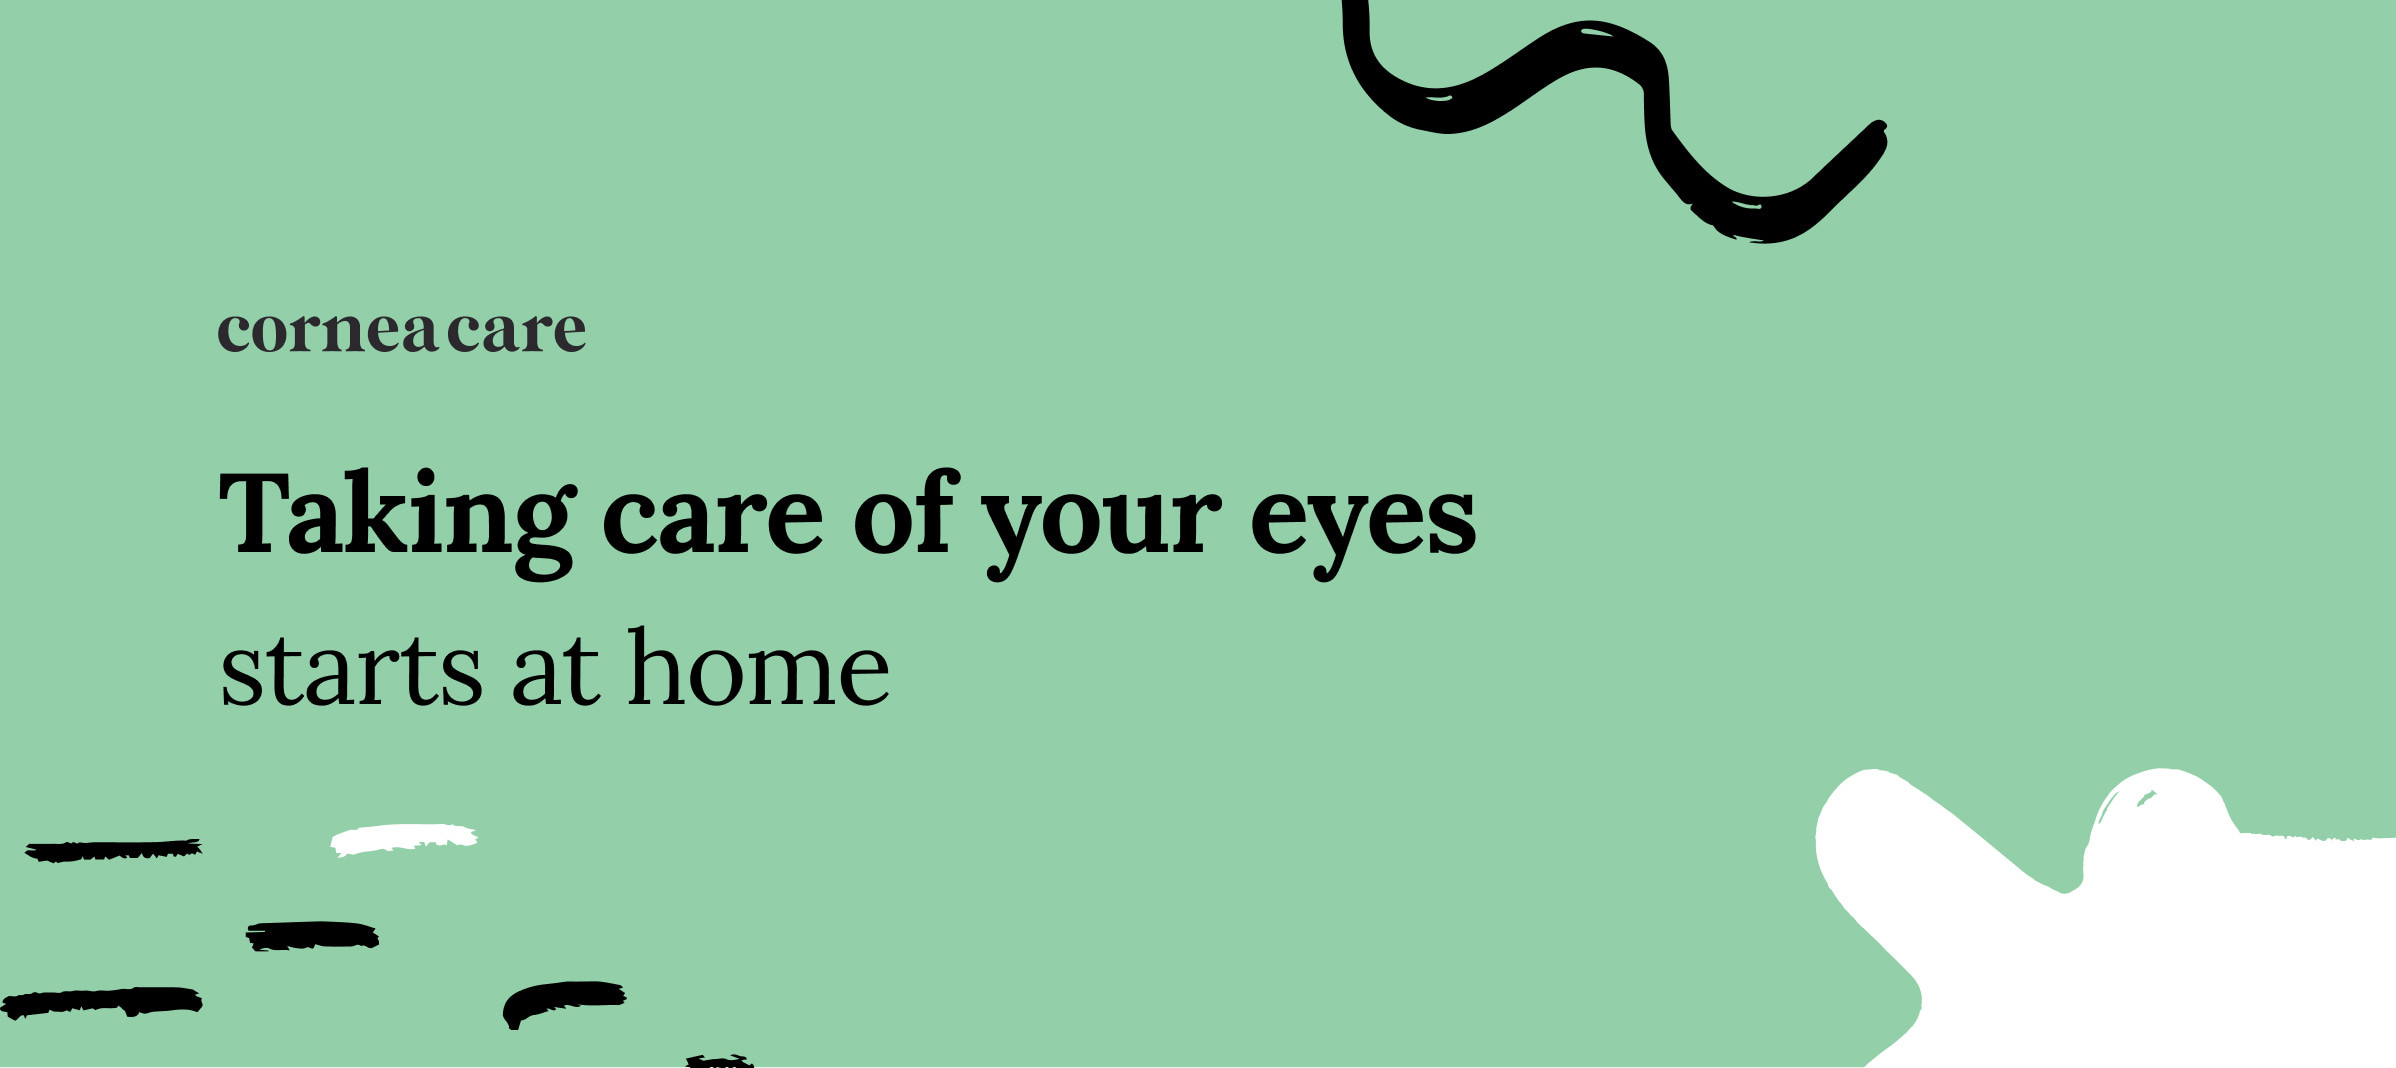 Simple home remedies for dry eyes that really work